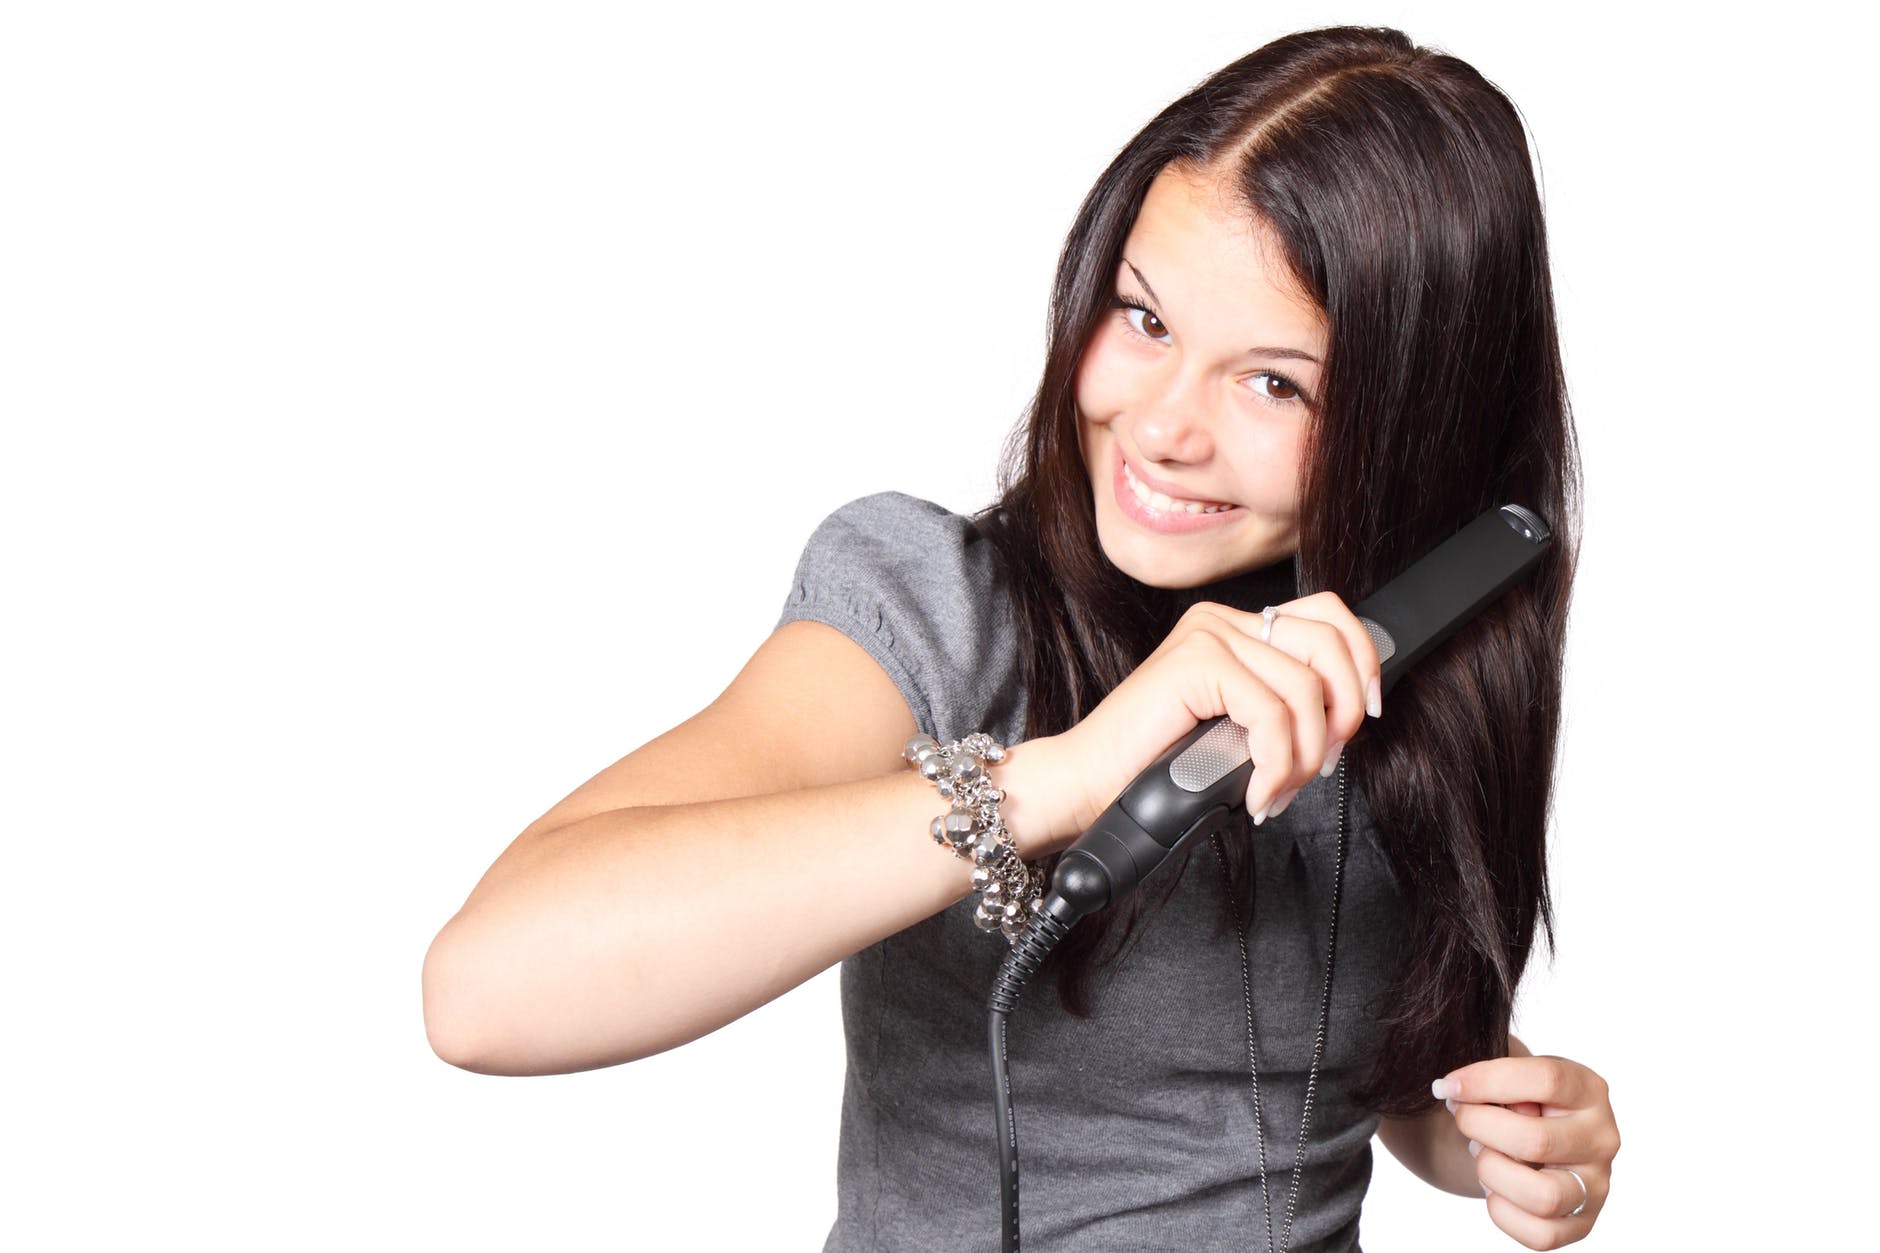 Get Party Ready at Home with These Philips Hair products 